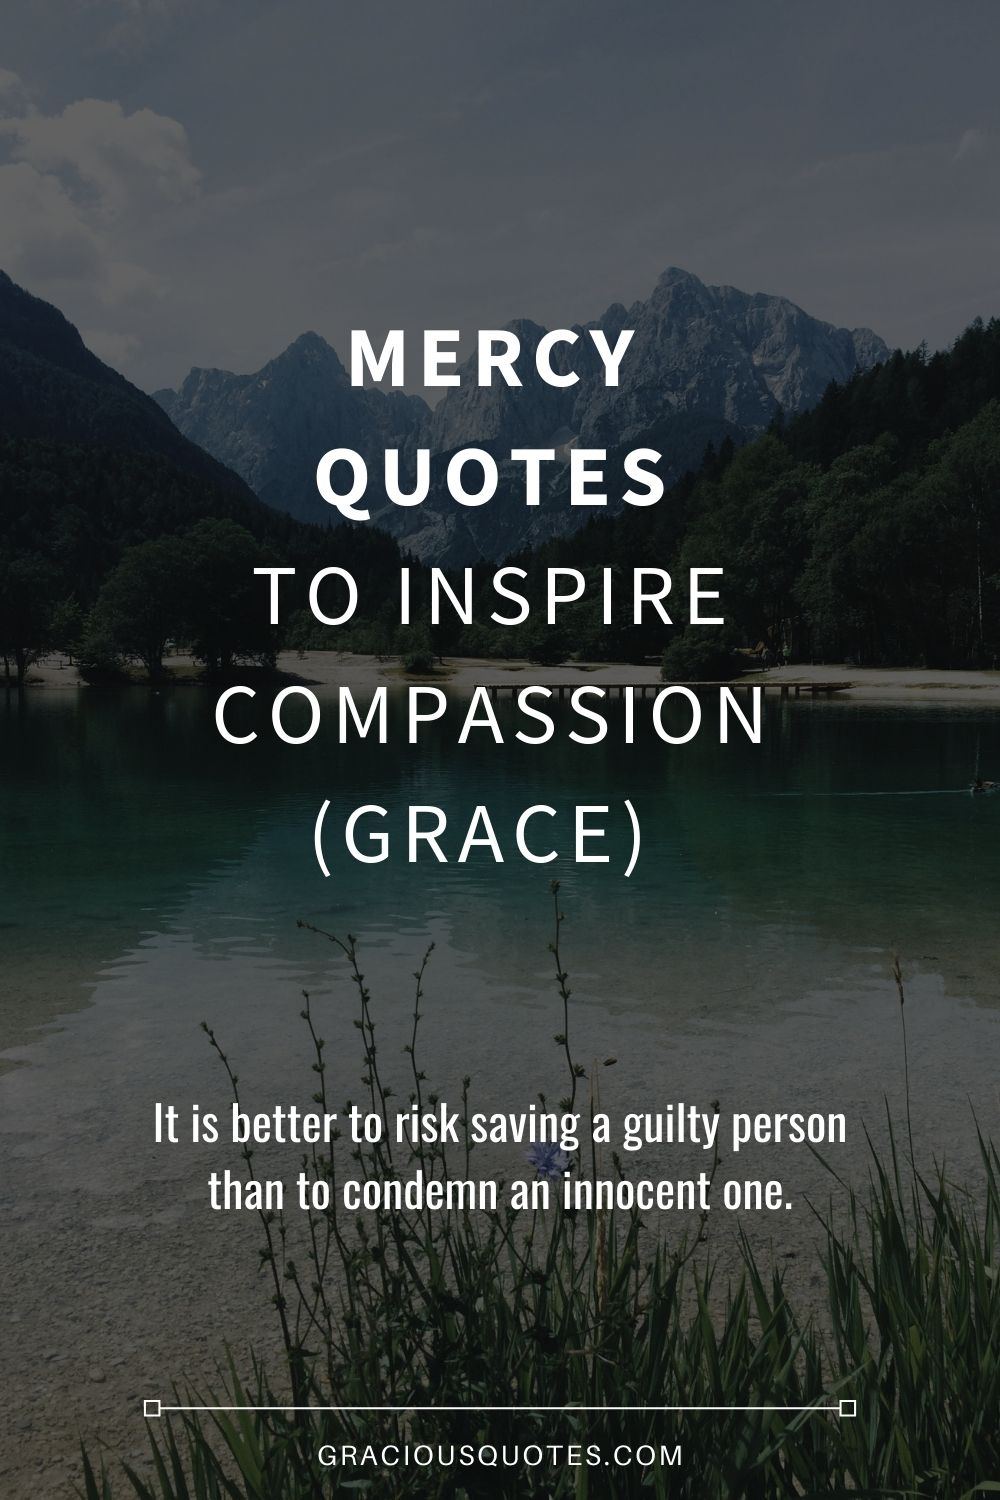 Mercy Quotes to Inspire Compassion (GRACE) - Gracious Quotes